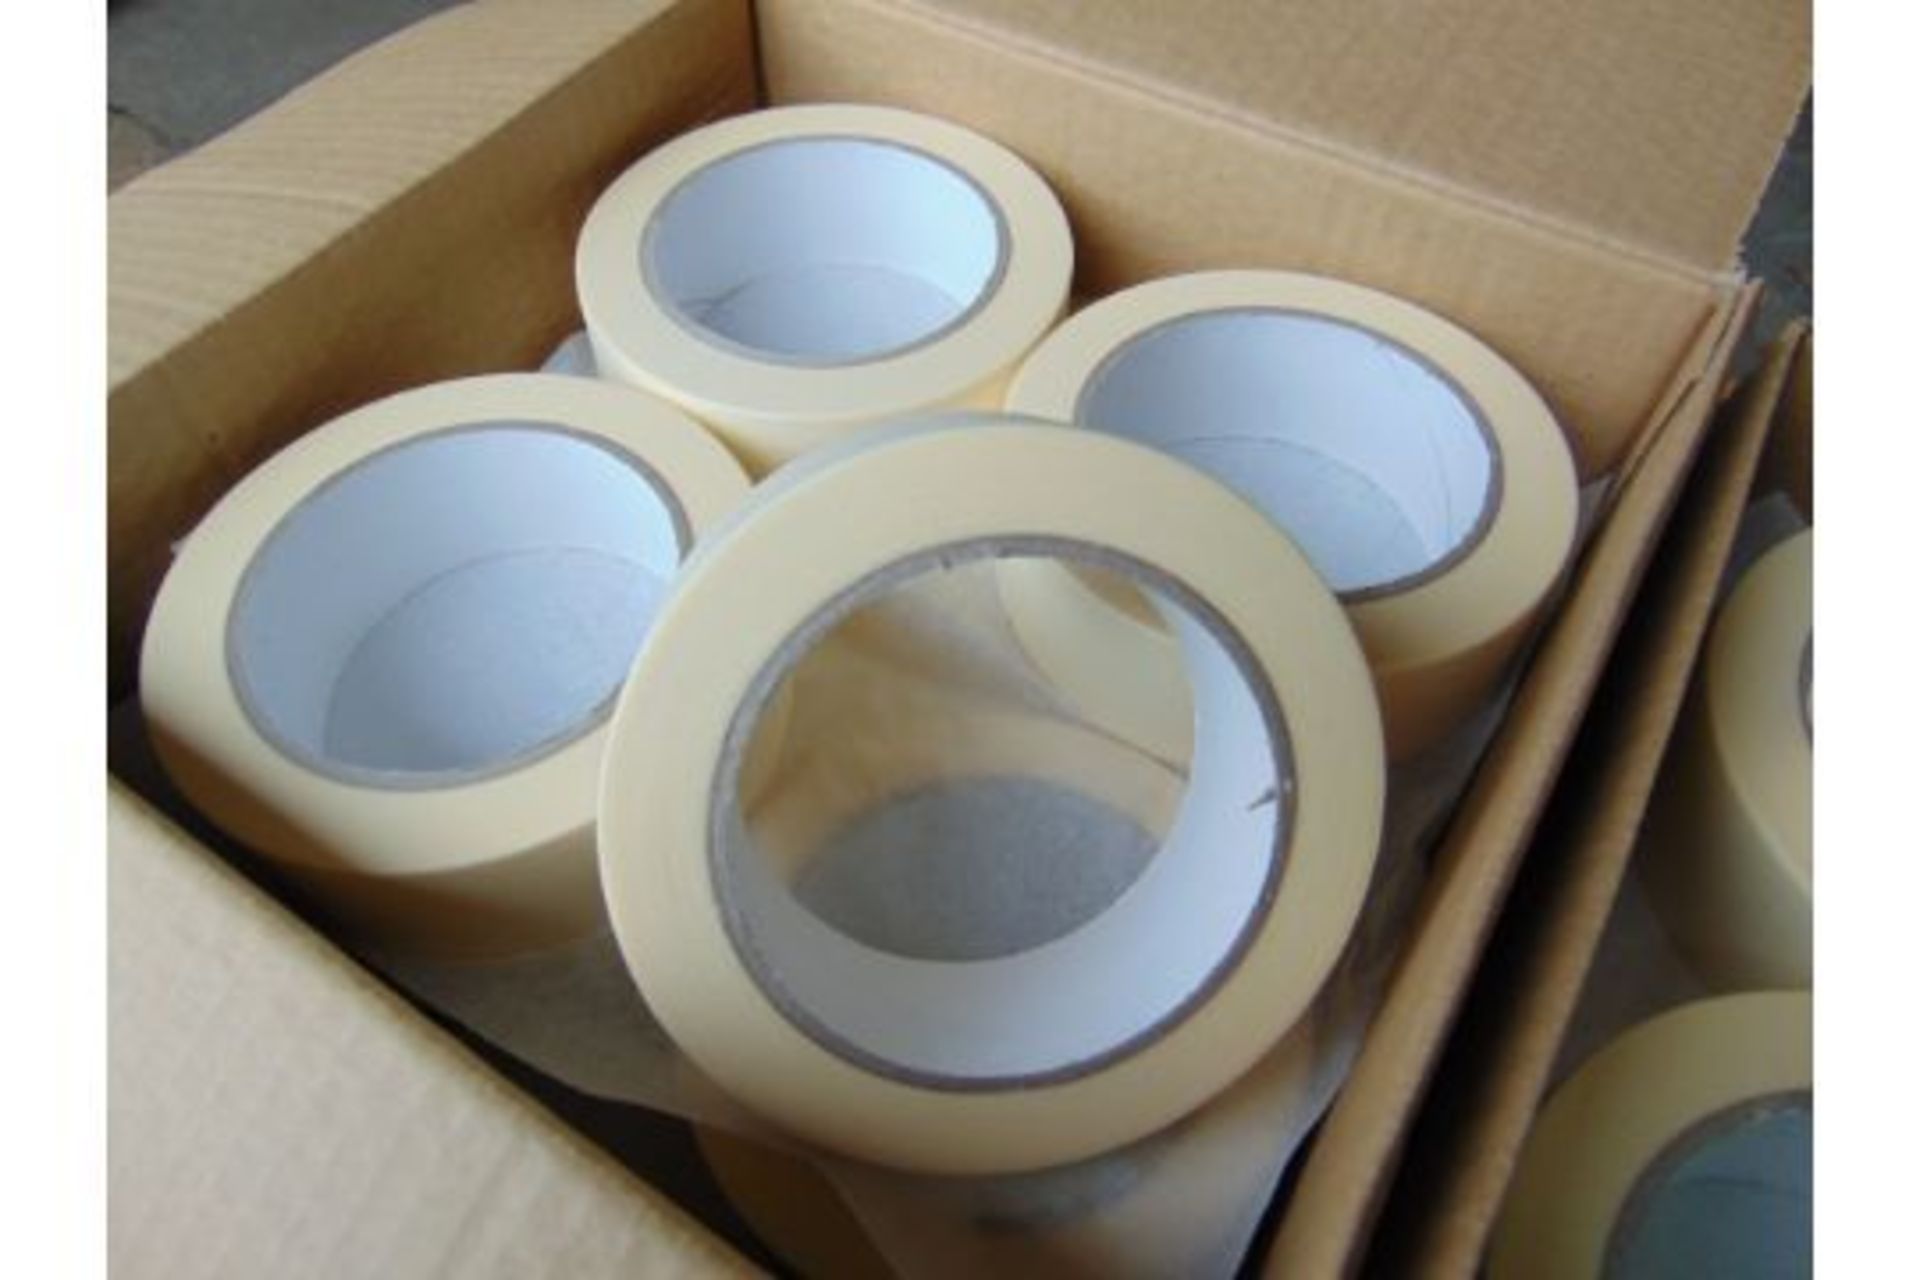 48 Rolls of Masking Tape - 36mm x 50m New from UK MOD - Image 3 of 6